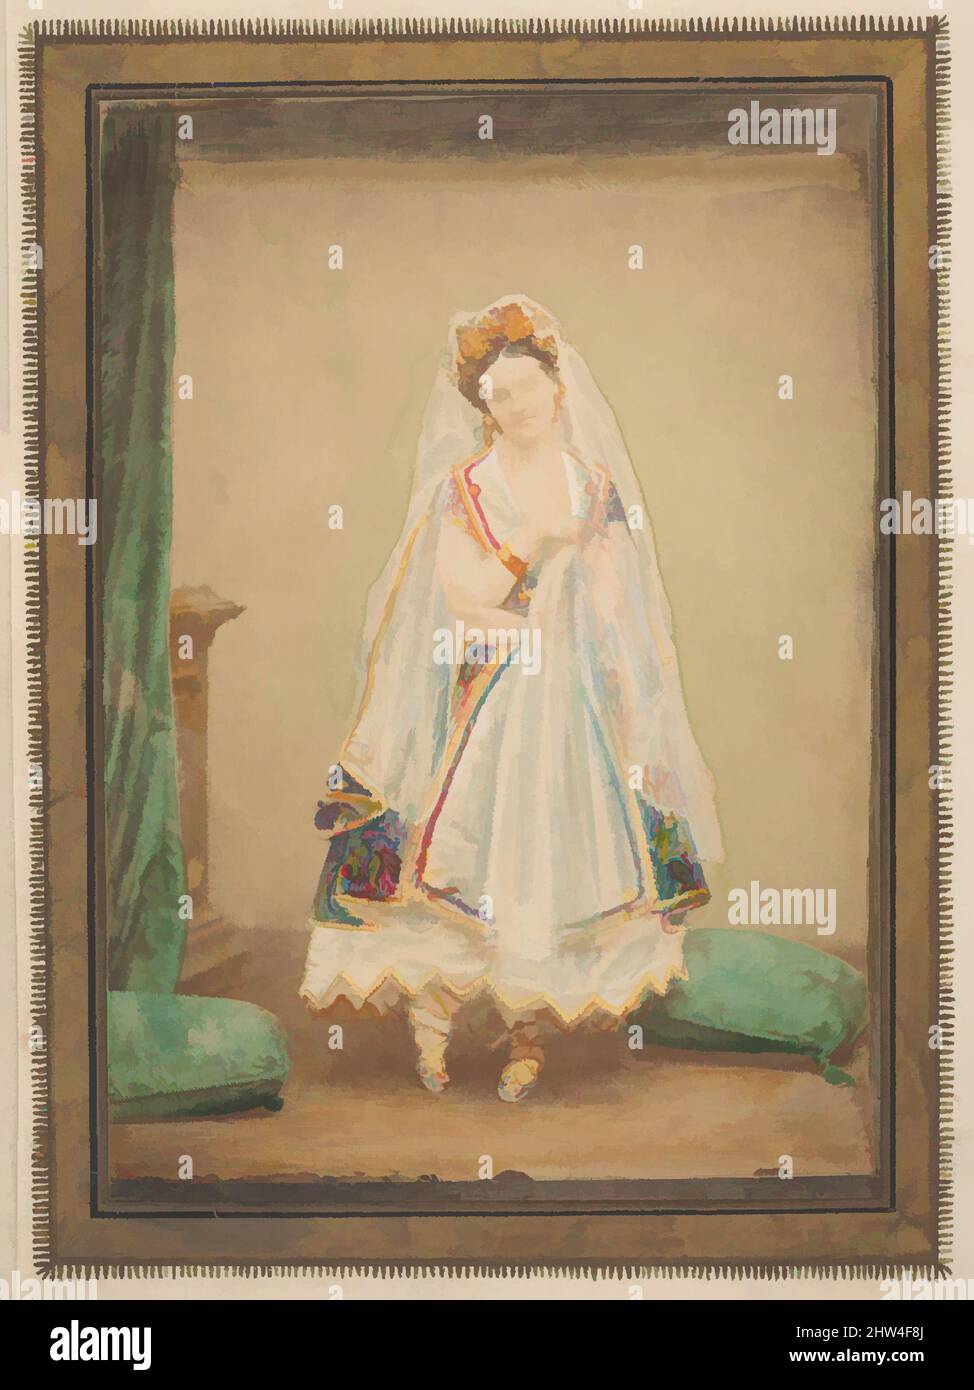 Art inspired by La Comtesse in robe de piqué or as Judith (?), 1860s, Albumen silver print from glass negative with applied color, 12.2 x 8.5 cm (4 13/16 x 3 3/8 in.), Photographs, Pierre-Louis Pierson (French, 1822–1913, Classic works modernized by Artotop with a splash of modernity. Shapes, color and value, eye-catching visual impact on art. Emotions through freedom of artworks in a contemporary way. A timeless message pursuing a wildly creative new direction. Artists turning to the digital medium and creating the Artotop NFT Stock Photo